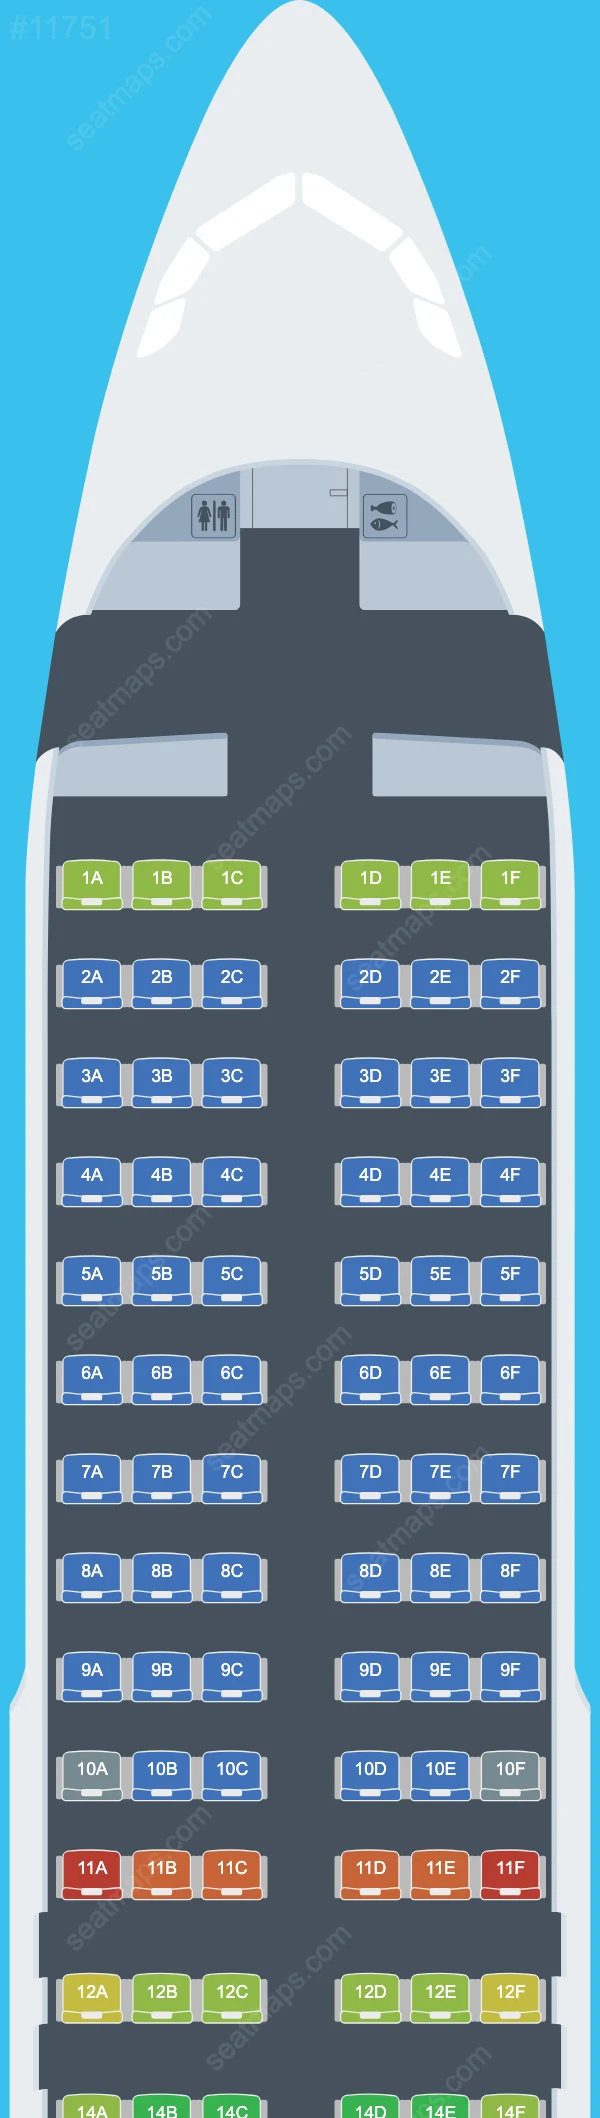 JetSMART Colombia Airbus A320neo seatmap preview